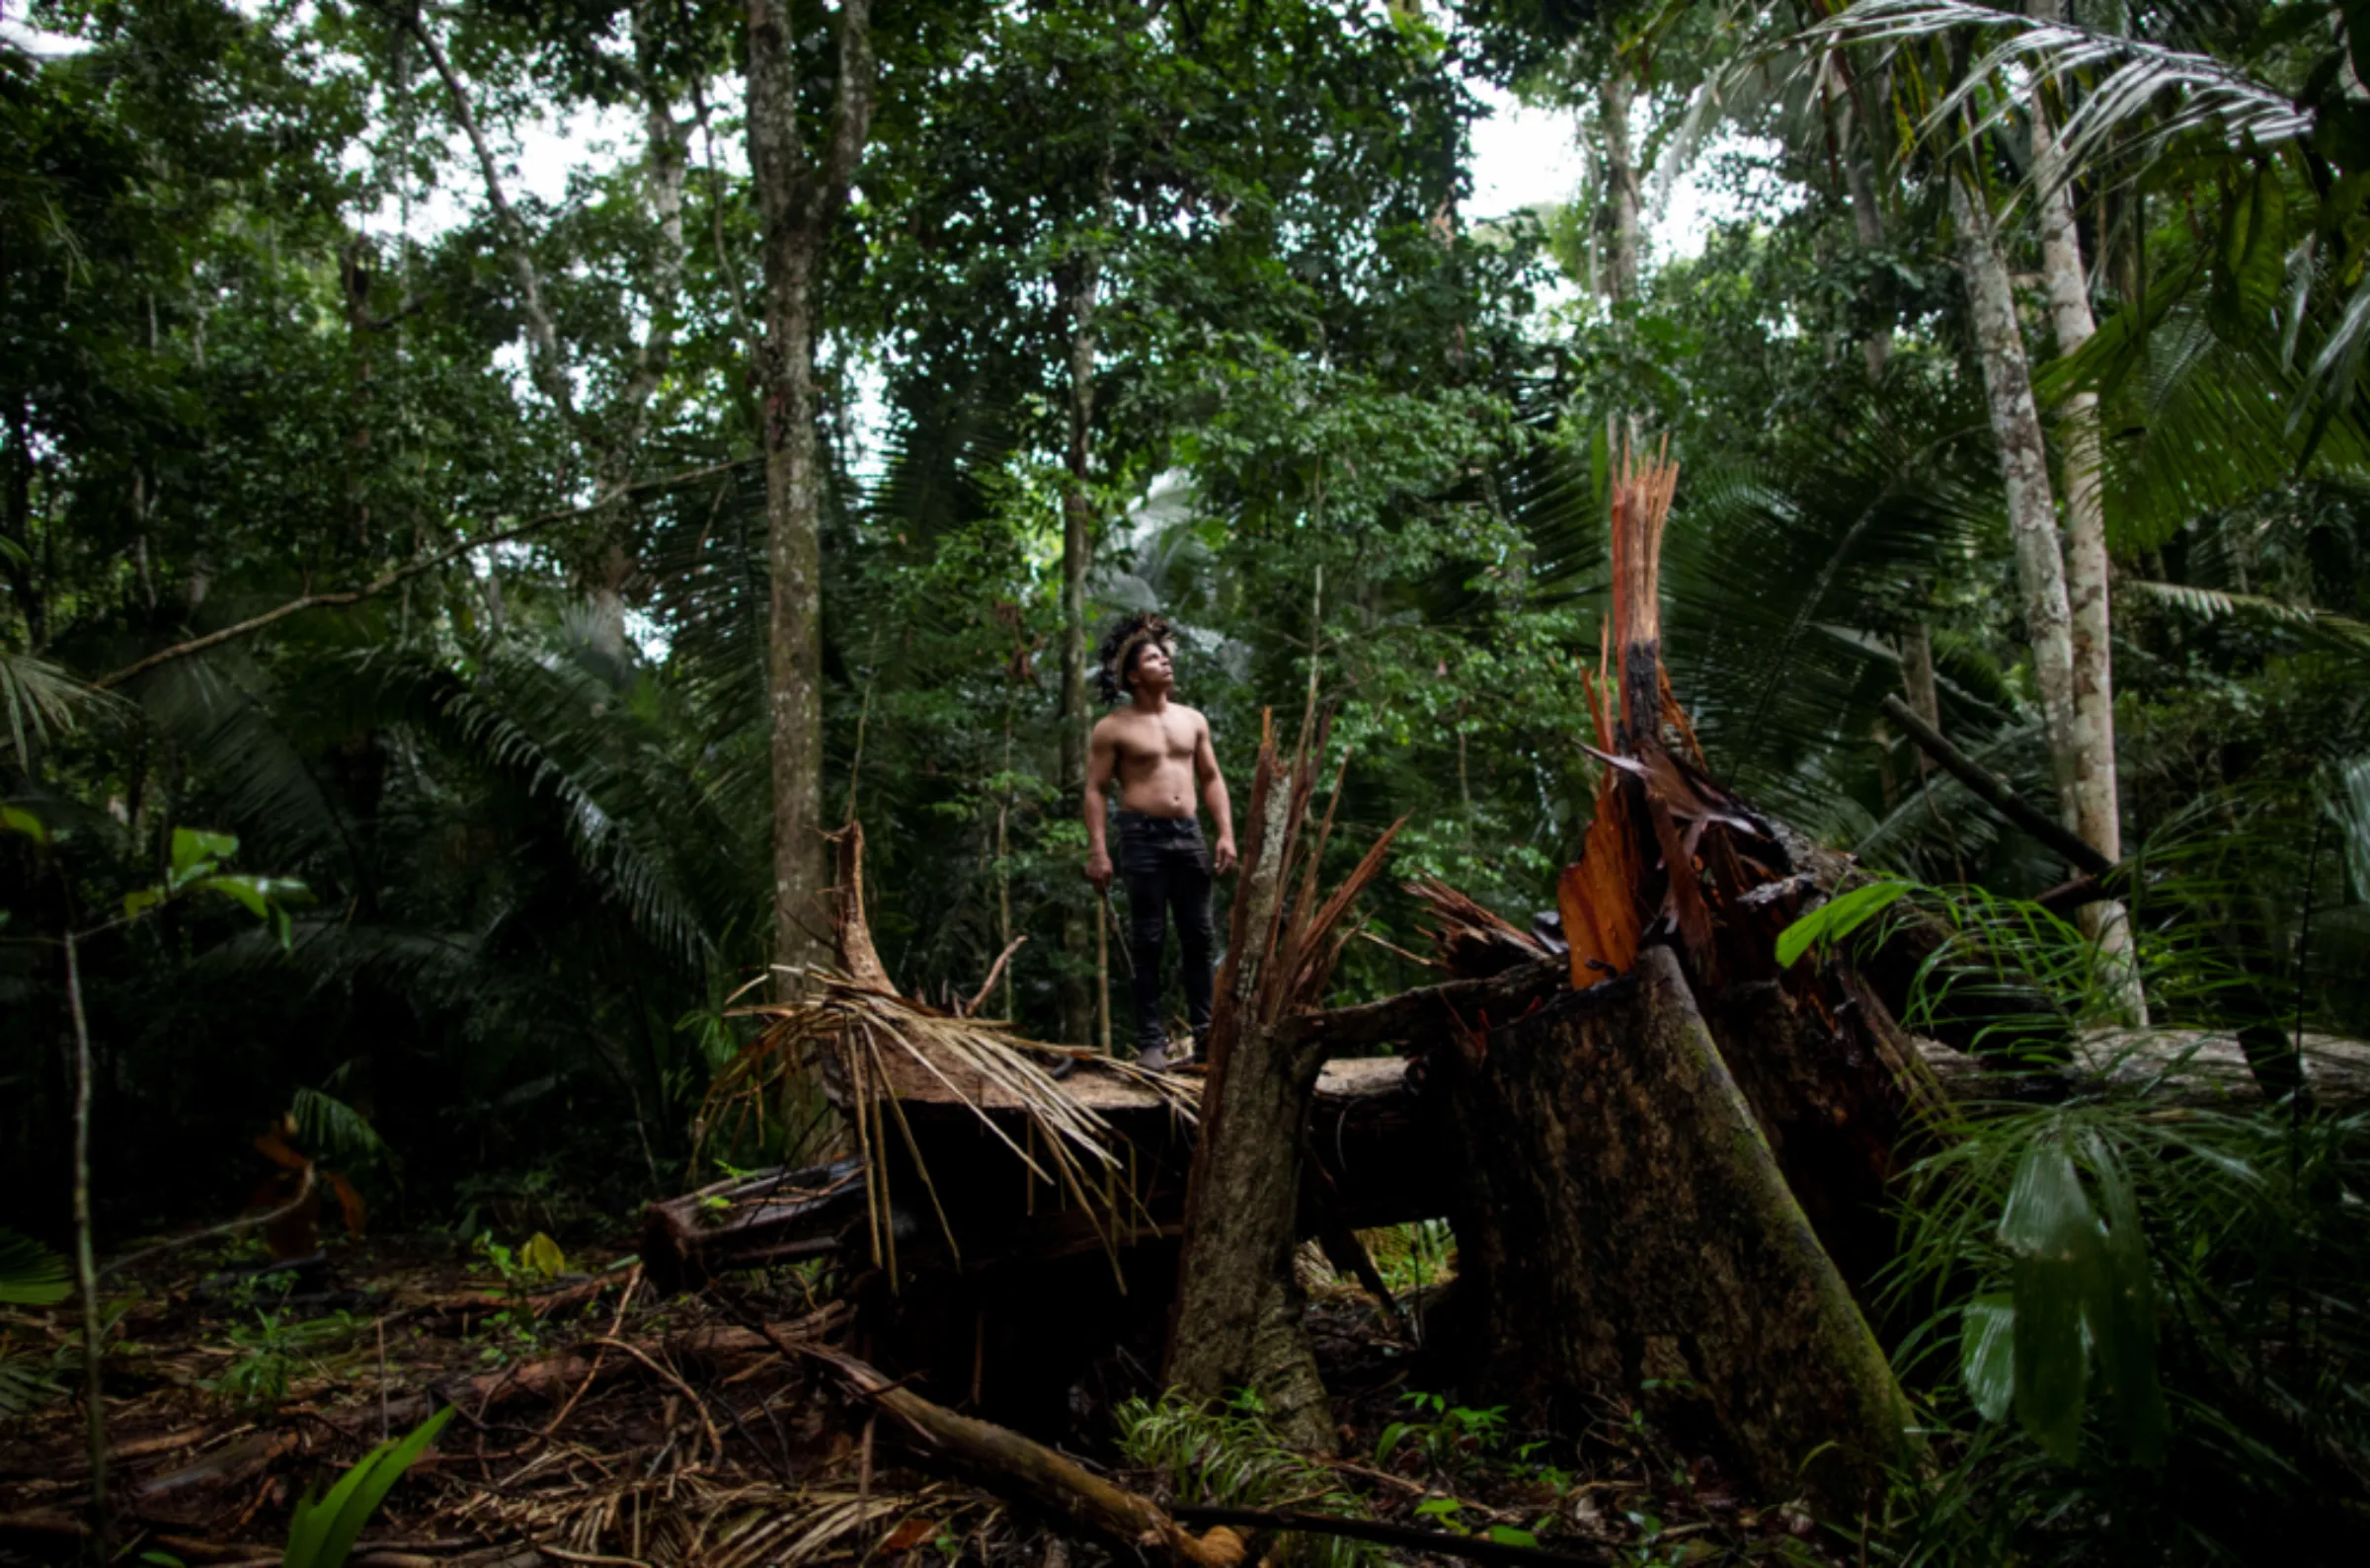 An indigenous man looks on in an area deforested by invaders in the village of Alto Jaru, at the Uru-eu-wau-wau Indigenous Reservation near Campo Novo de Rondonia, Brazil February 1, 2019